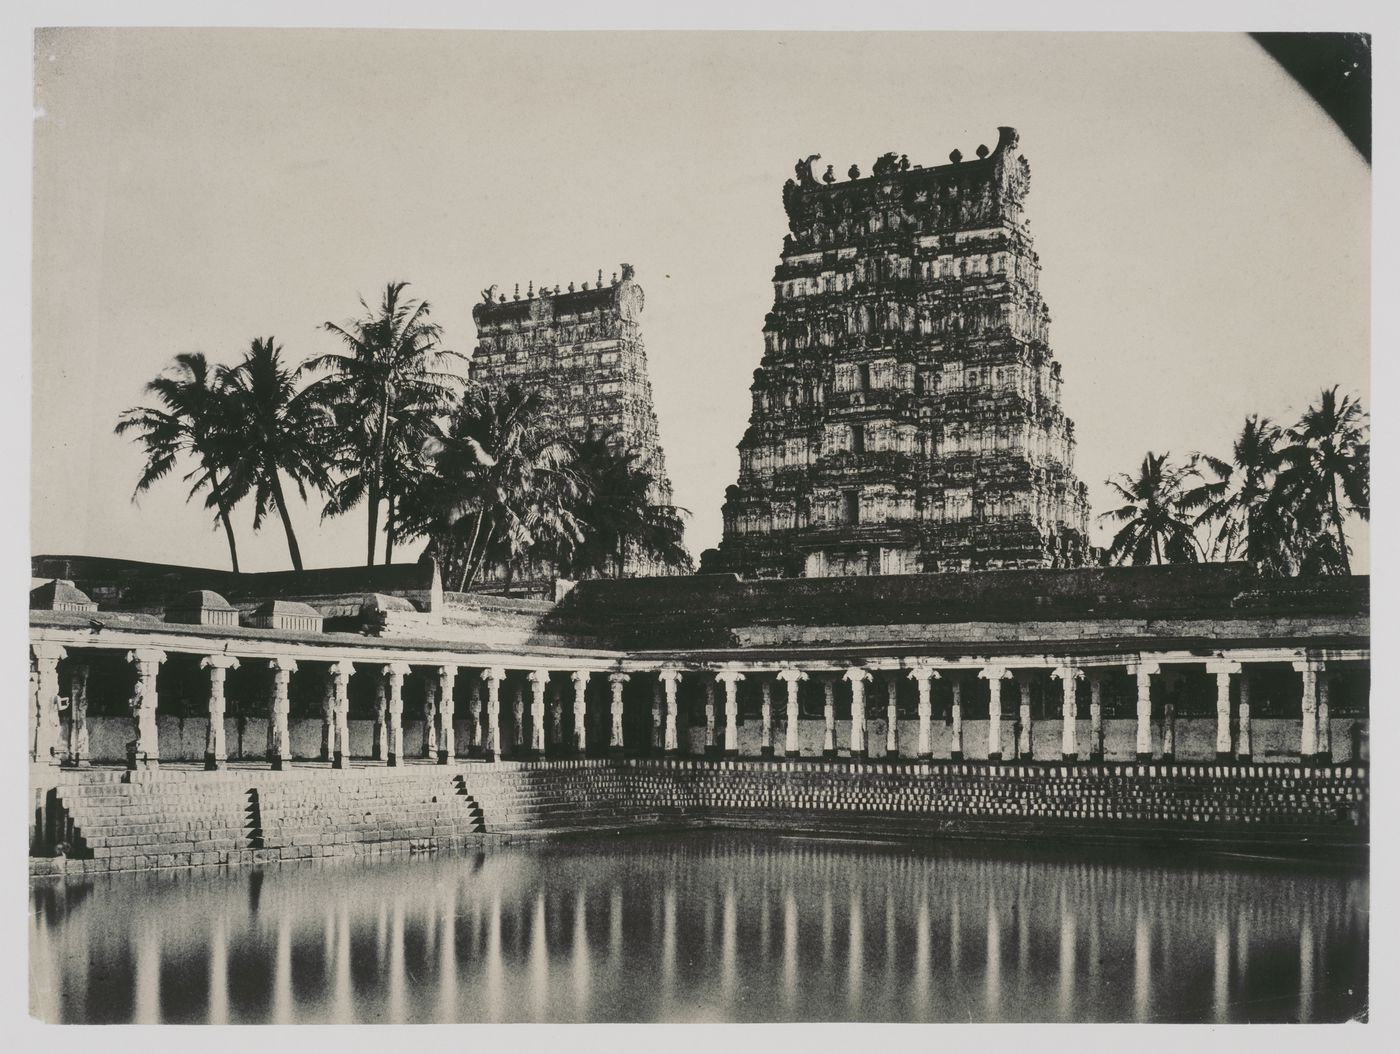 View of the Tank of Golden Lilies with the eastern gopuras in the background, Minakshi Sundaresvara Temple (also known as the Great Temple or Pagoda), Madura (now Madurai), India